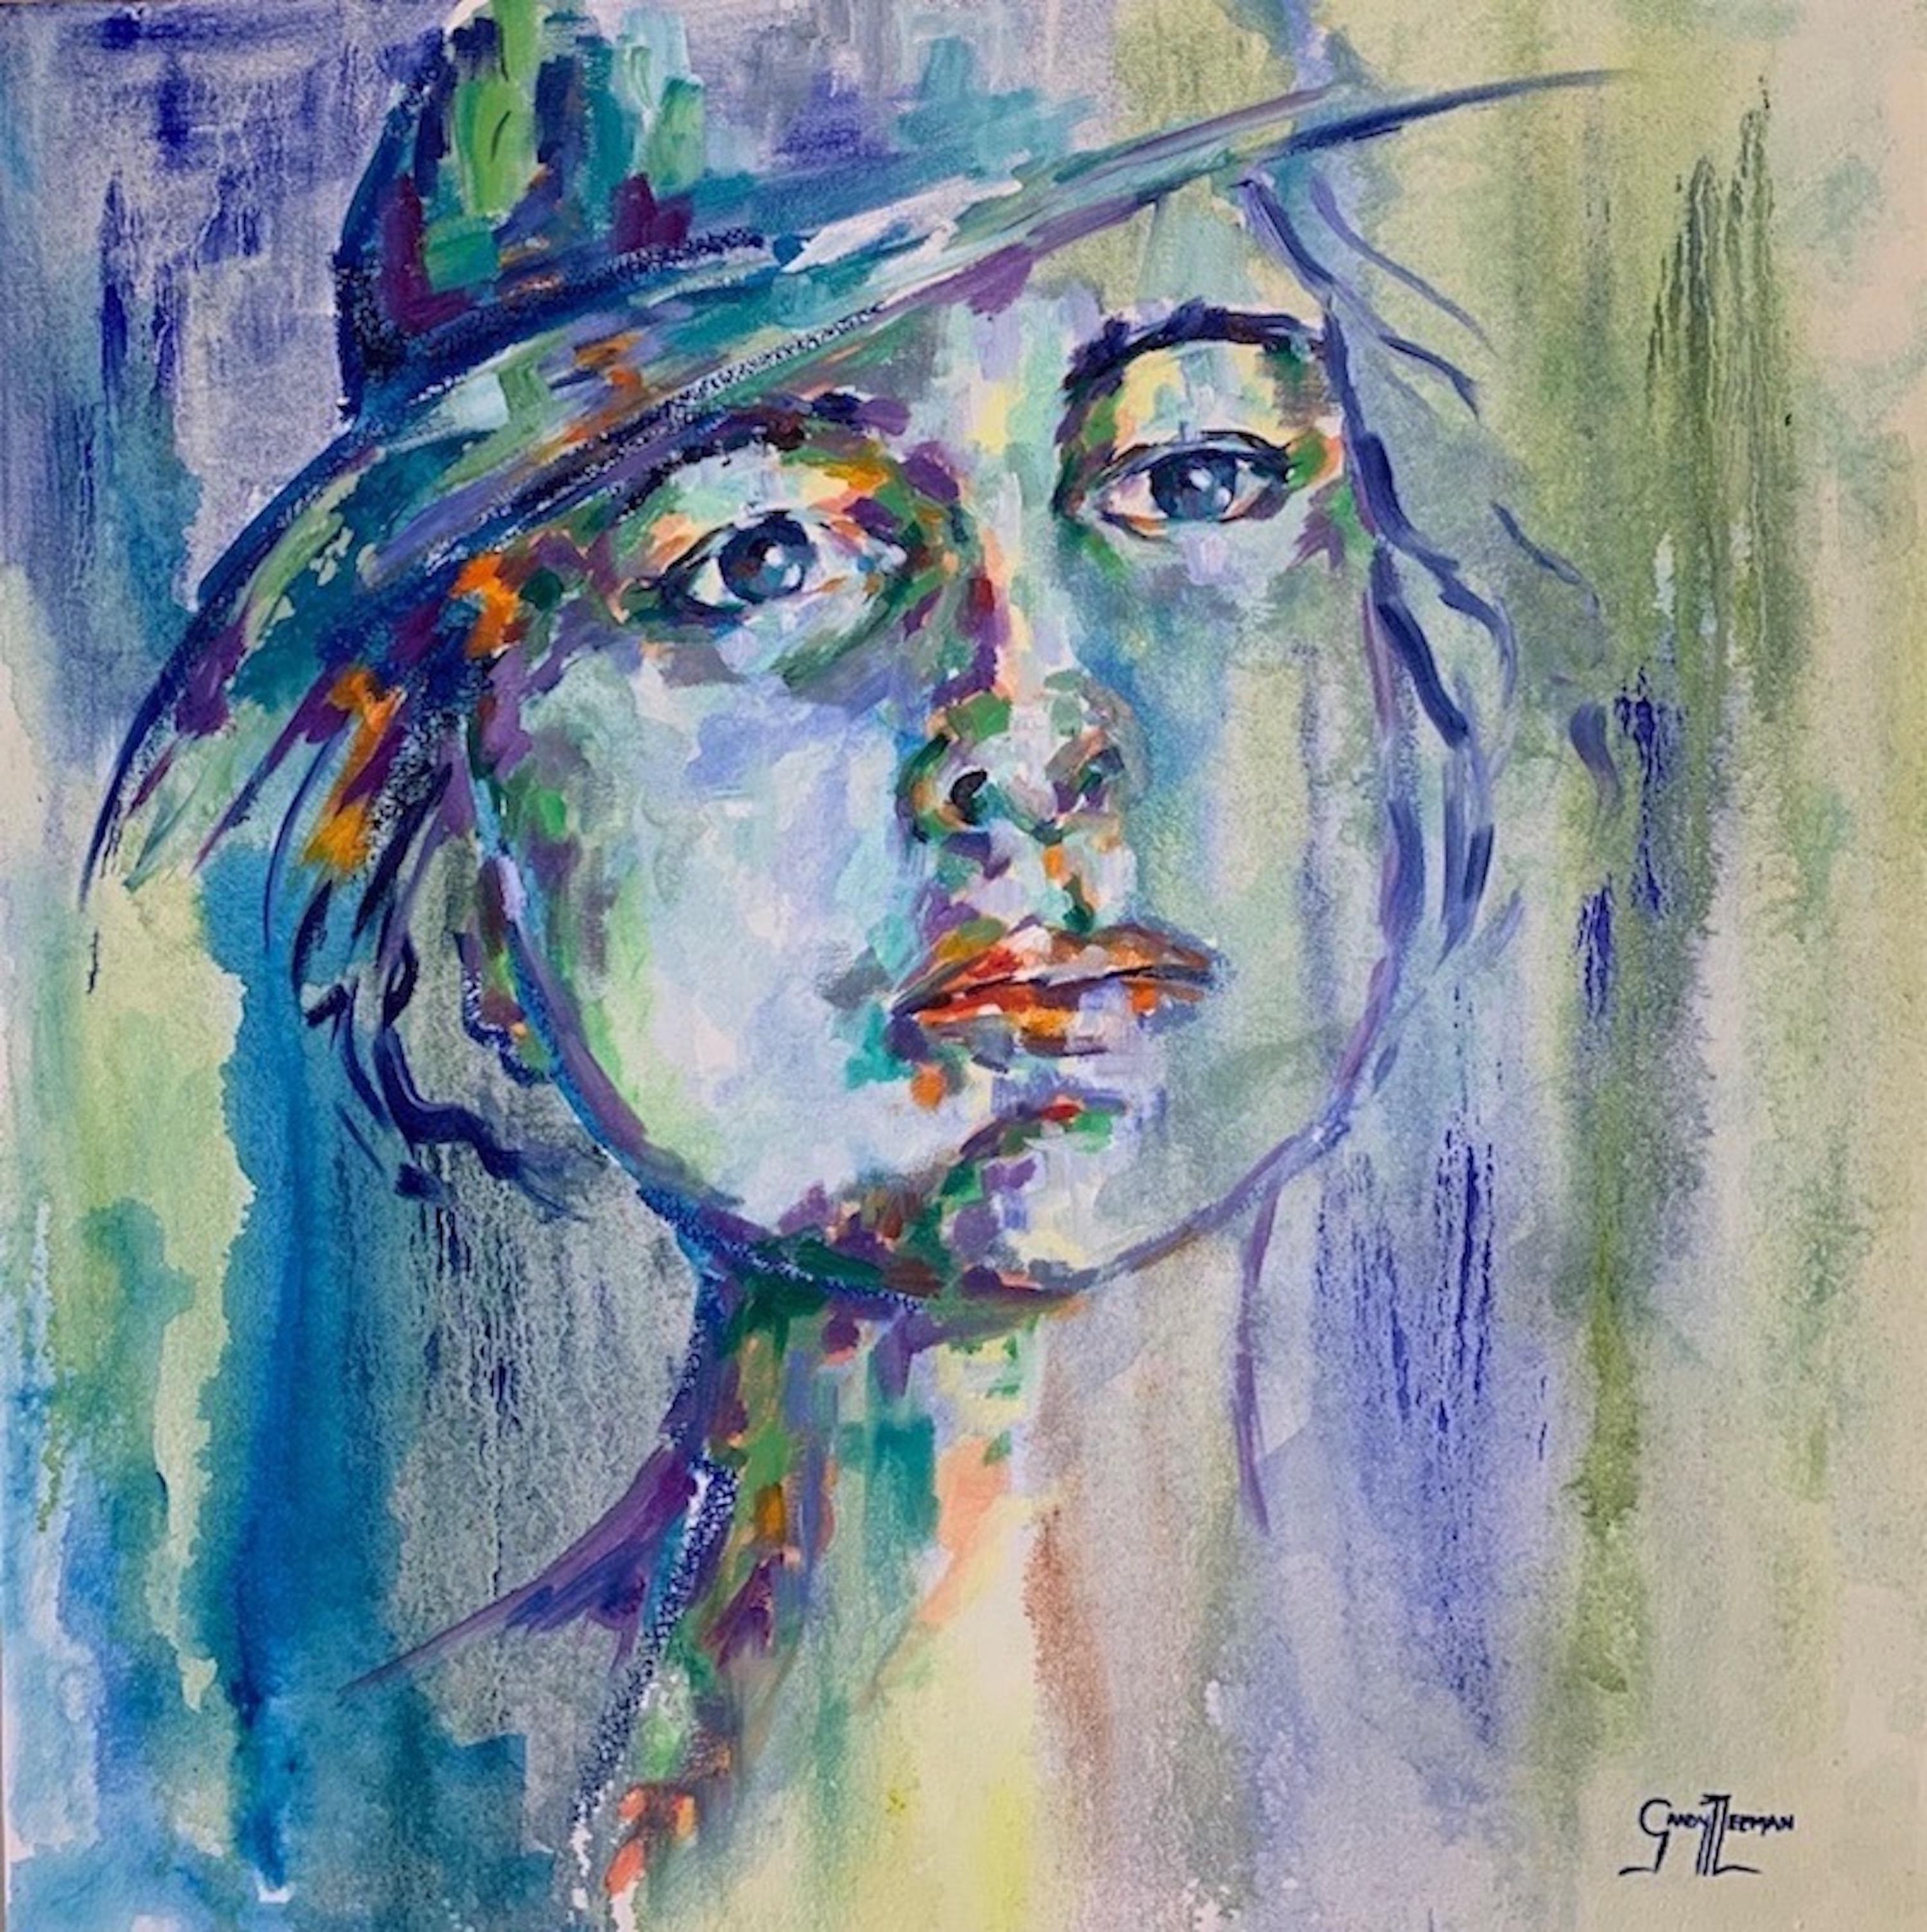 South African Art by G. T. Zeeman - She Learned To Value Her Choices - Painting by Grady Tomlinson Zeeman